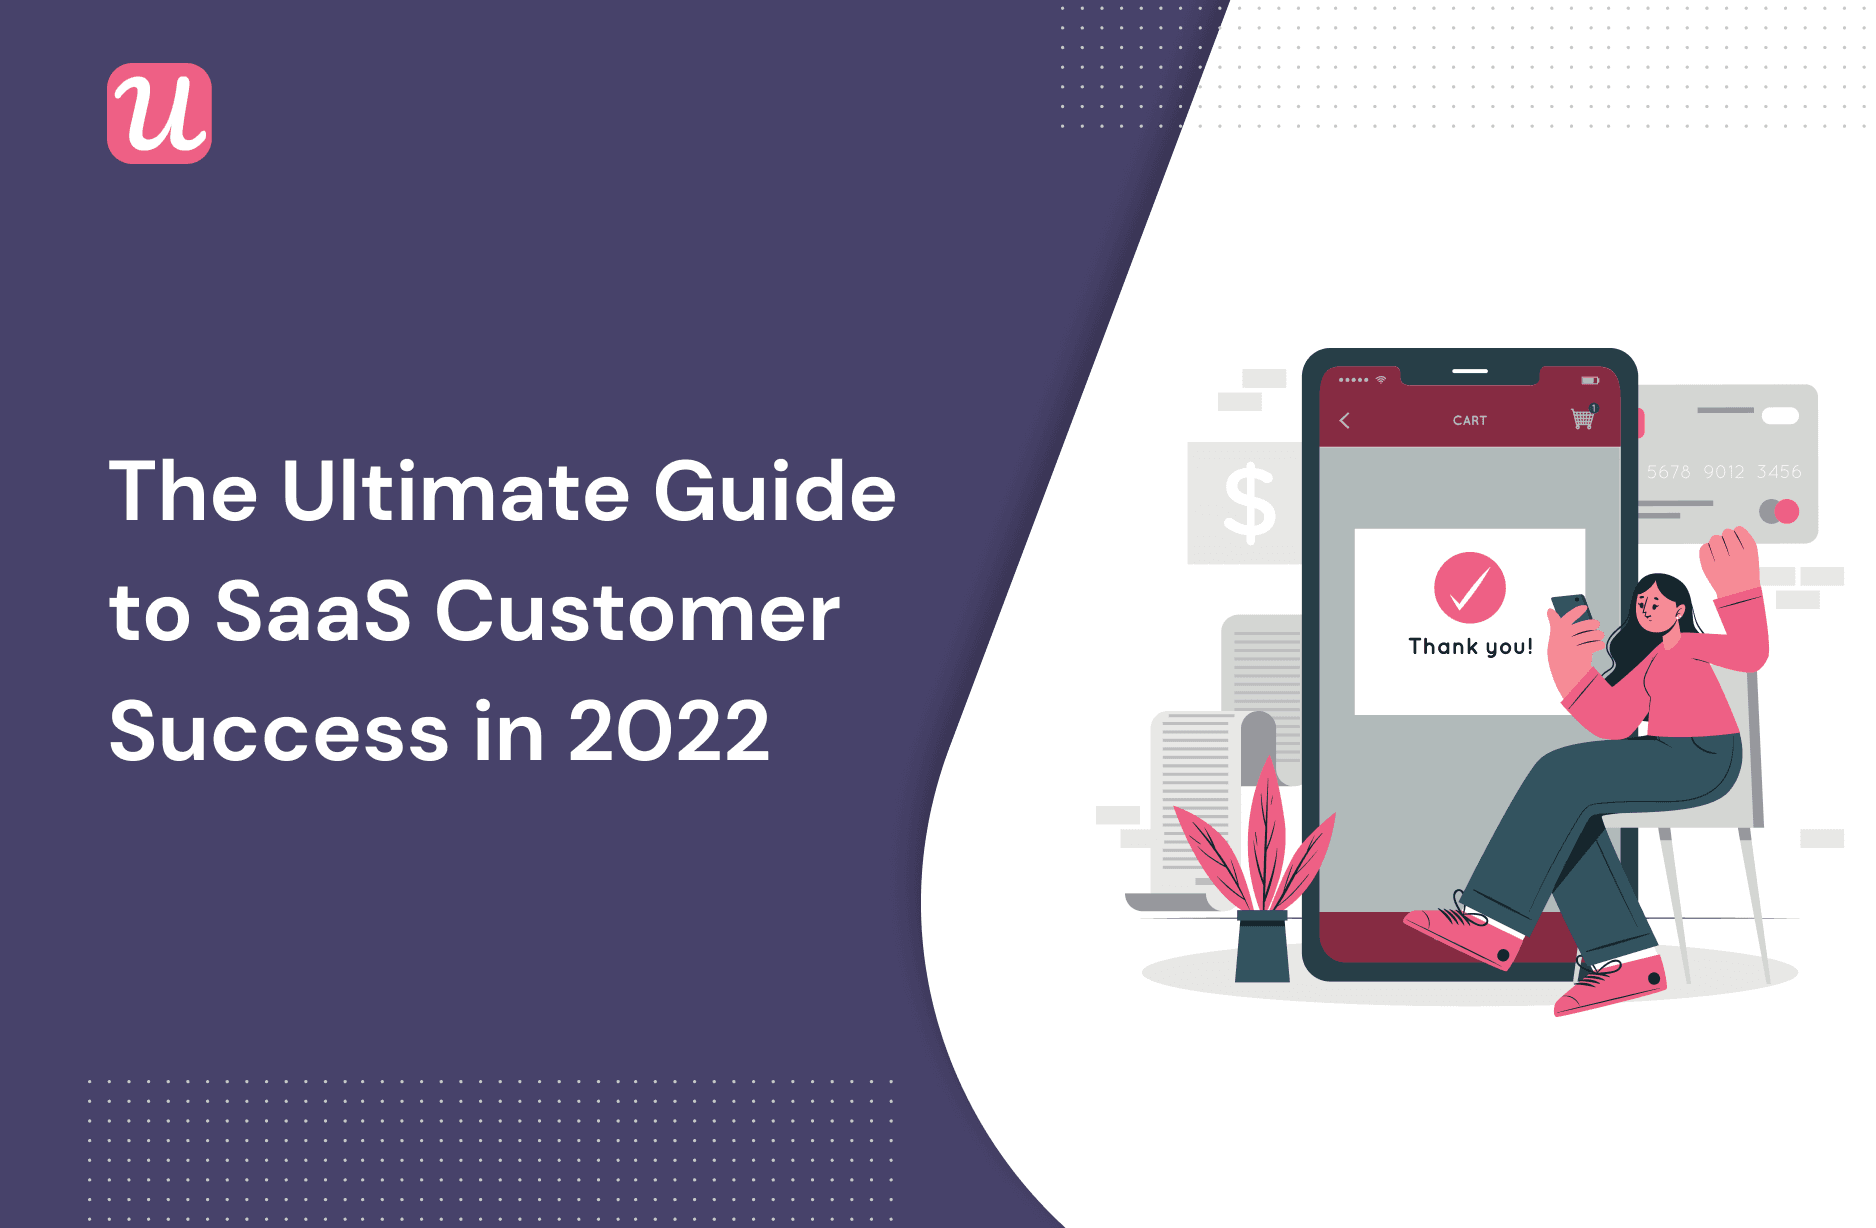 The Ultimate Guide to SaaS Customer Success in 2022